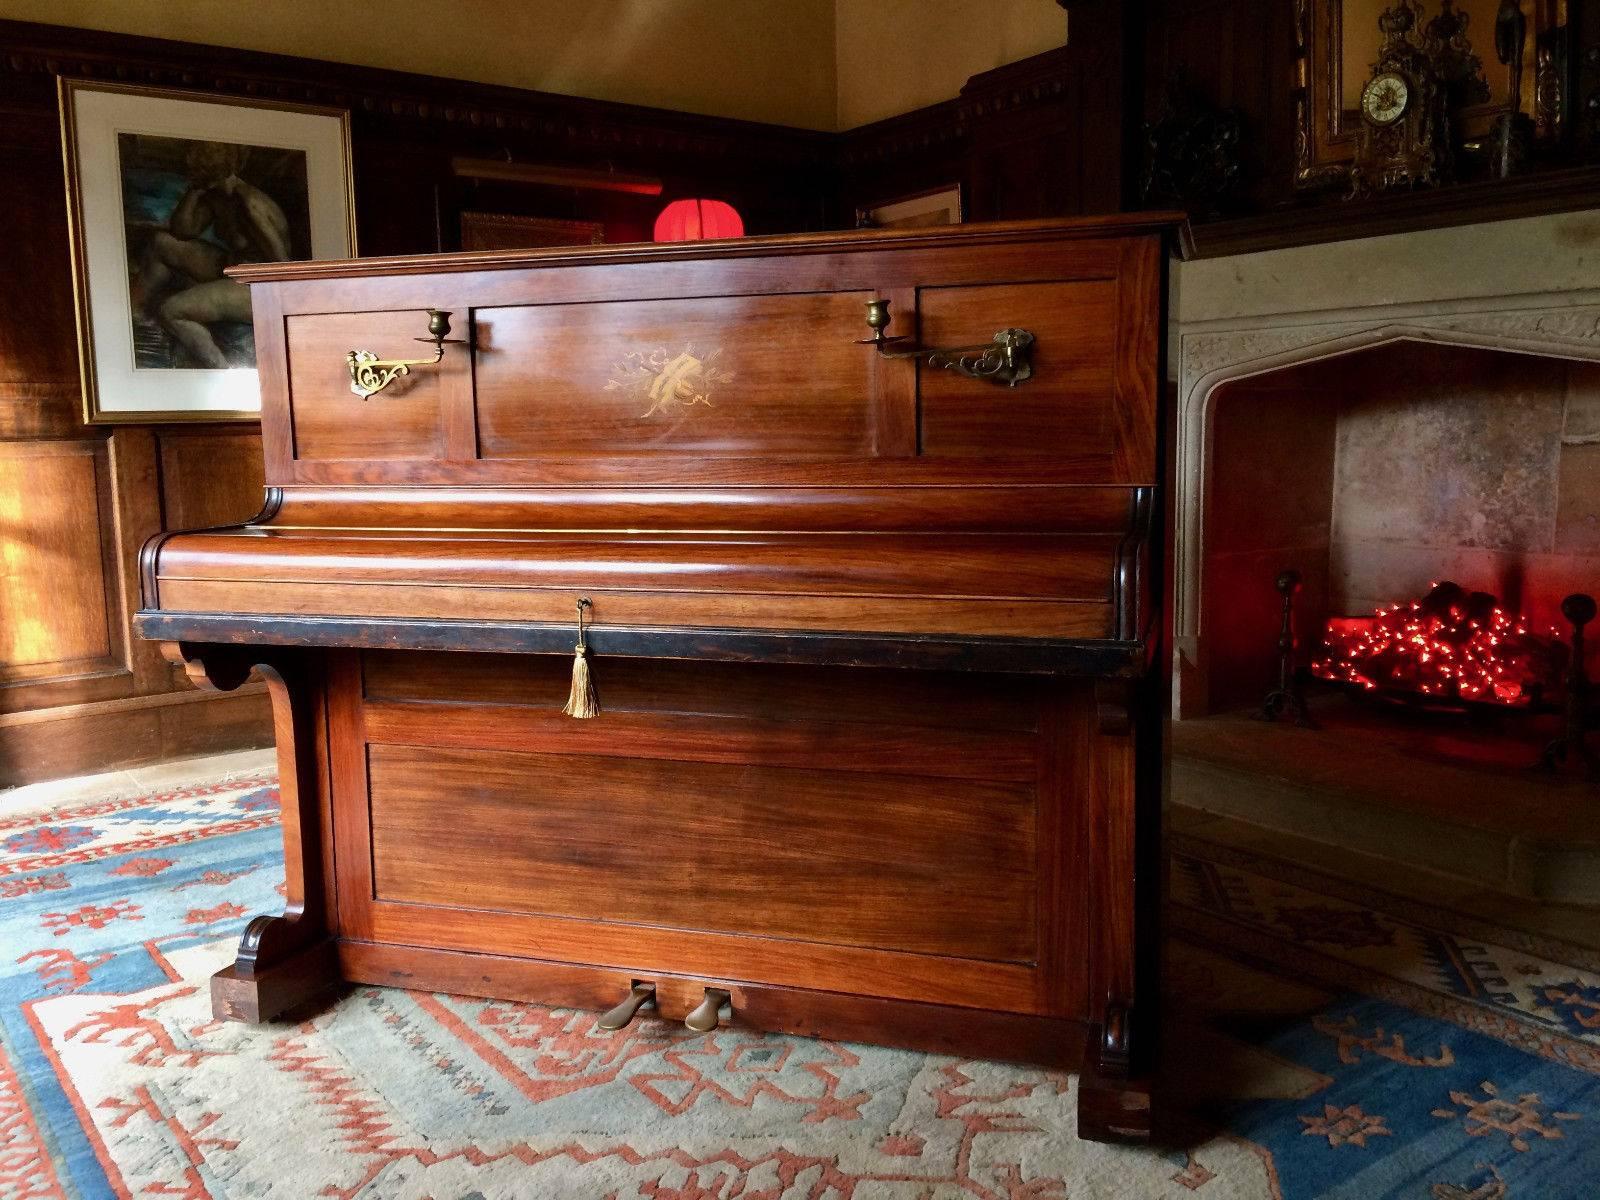 A fabulous antique 19th century Victorian inlaid rosewood upright piano by John Broadwood & Sons of London circa 1875, with fold away drop down music sheet holder, brass candle holders and brass pedals, the piano is offered in superb condition with